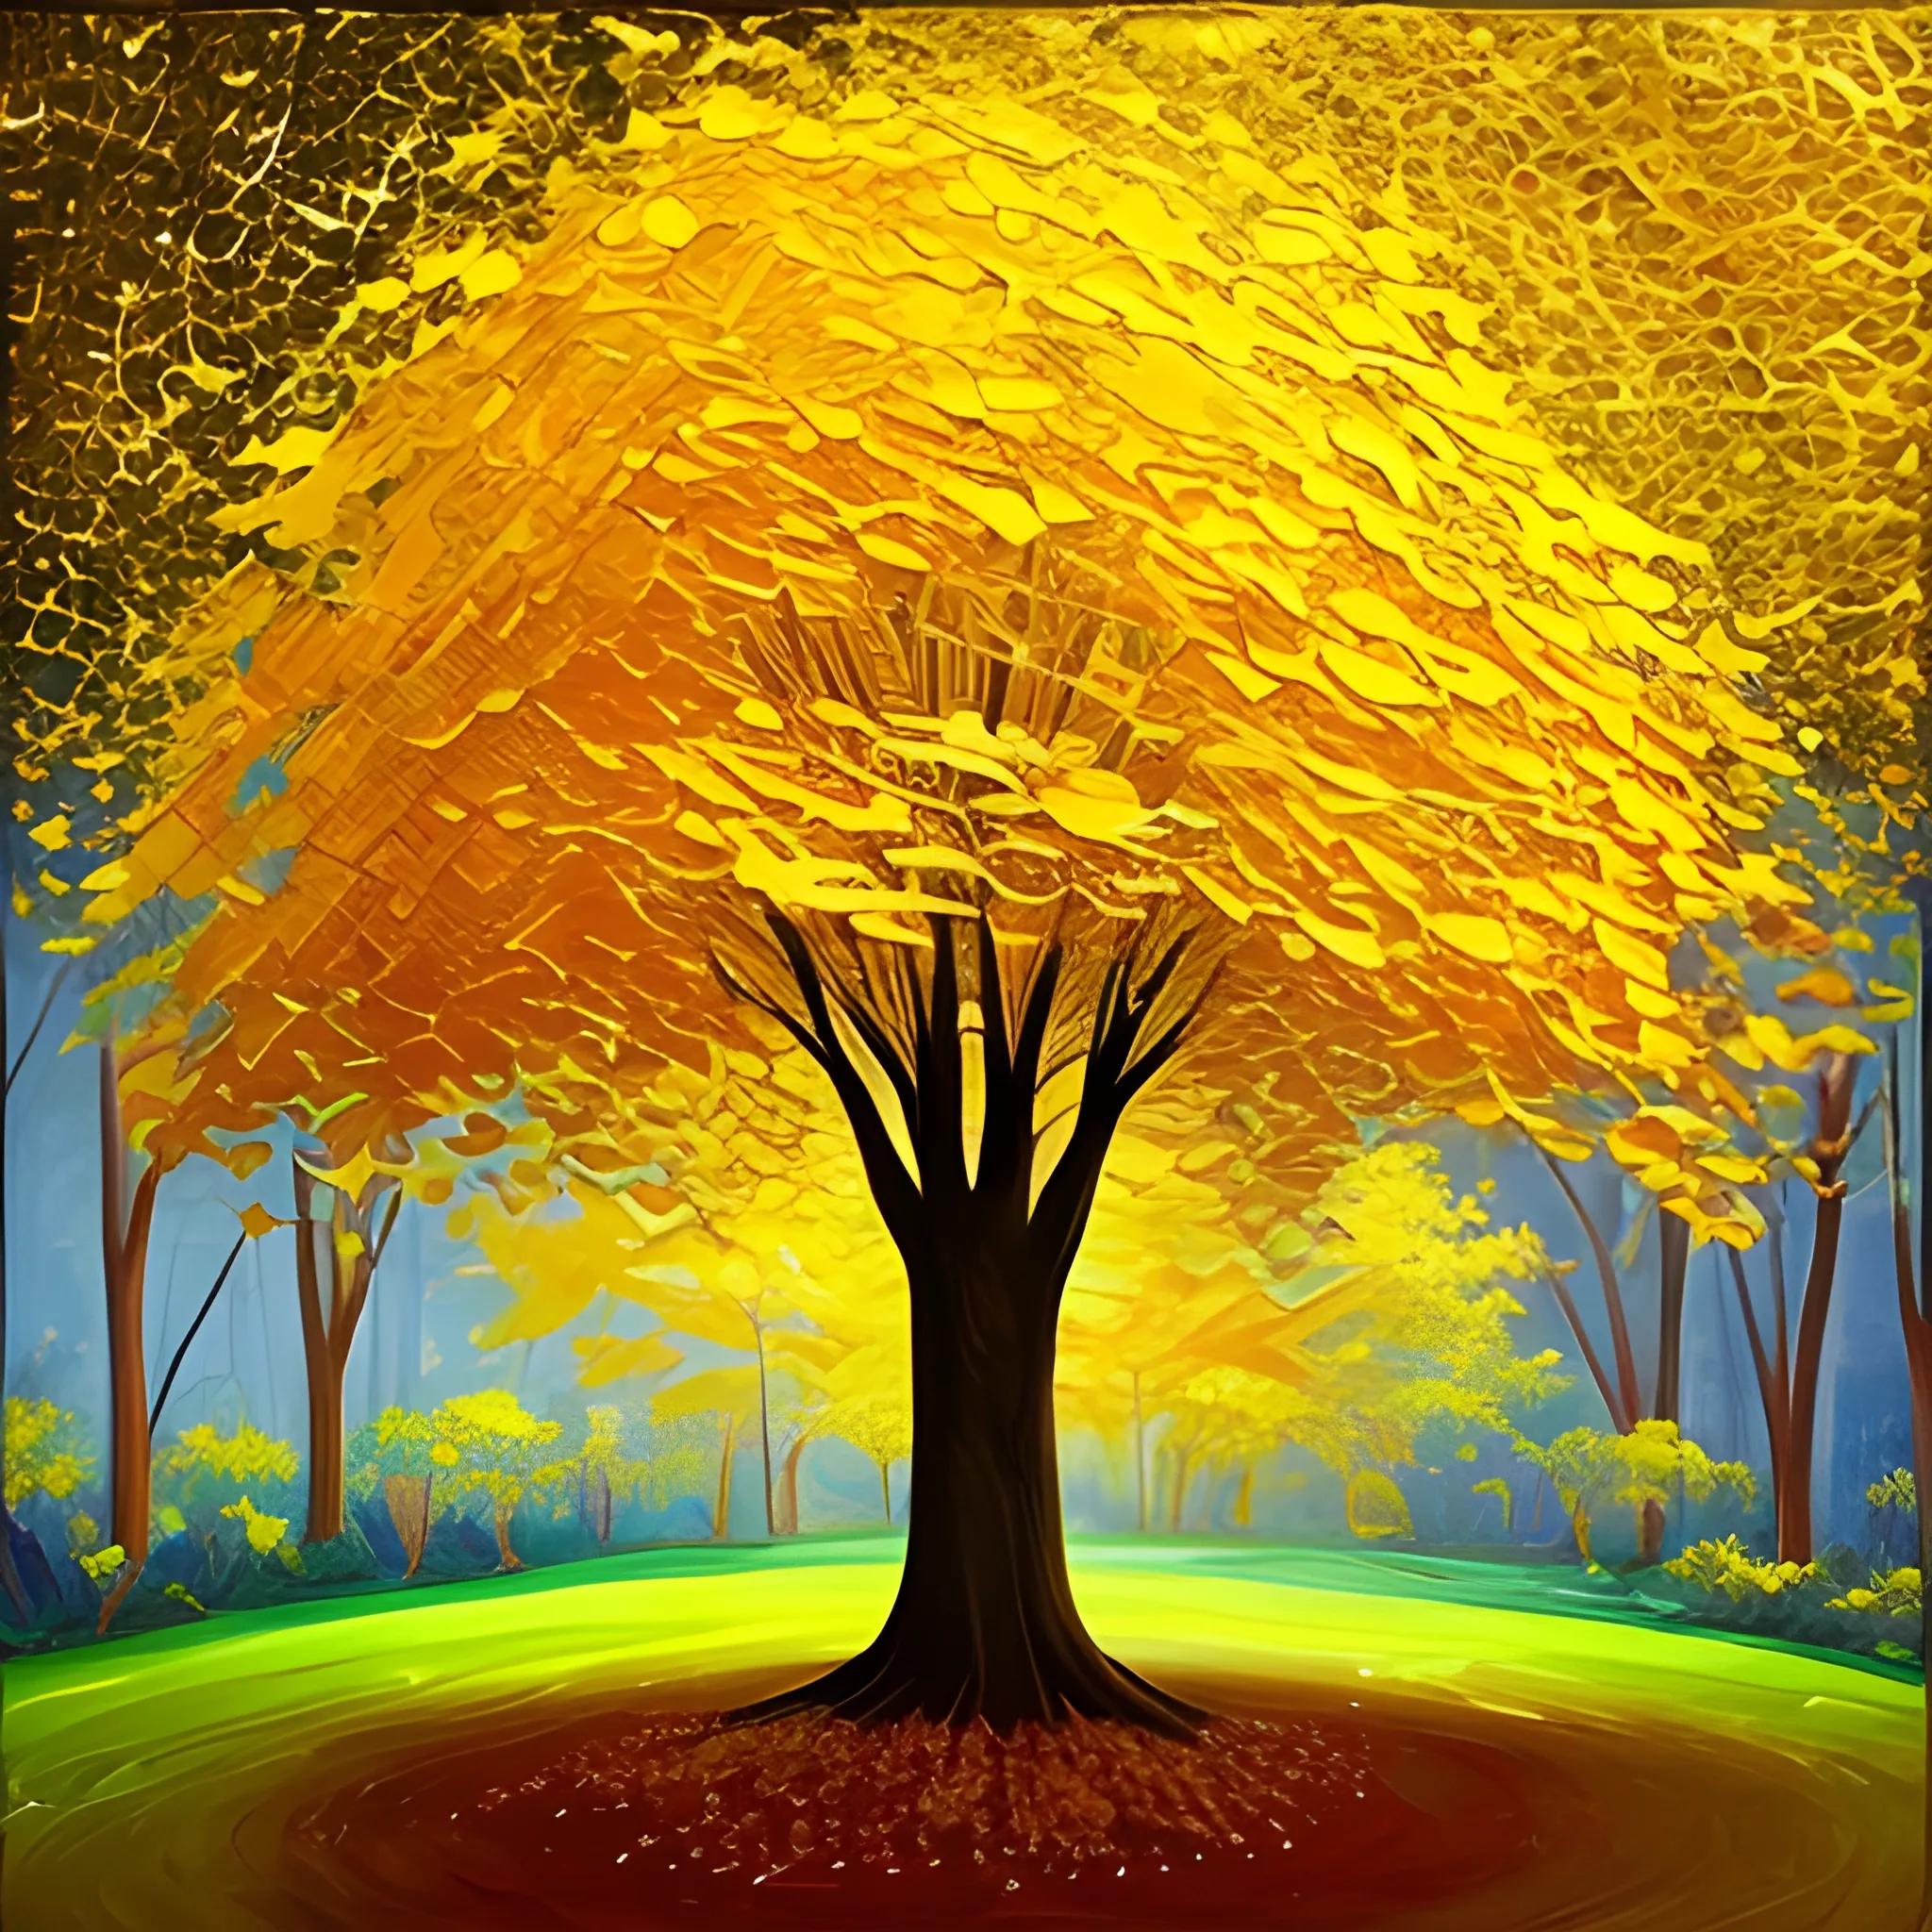 make an image of a beautiful golden tree, that is used for the promotion of the golden tree life center. Make a beautiful painting of it. 
